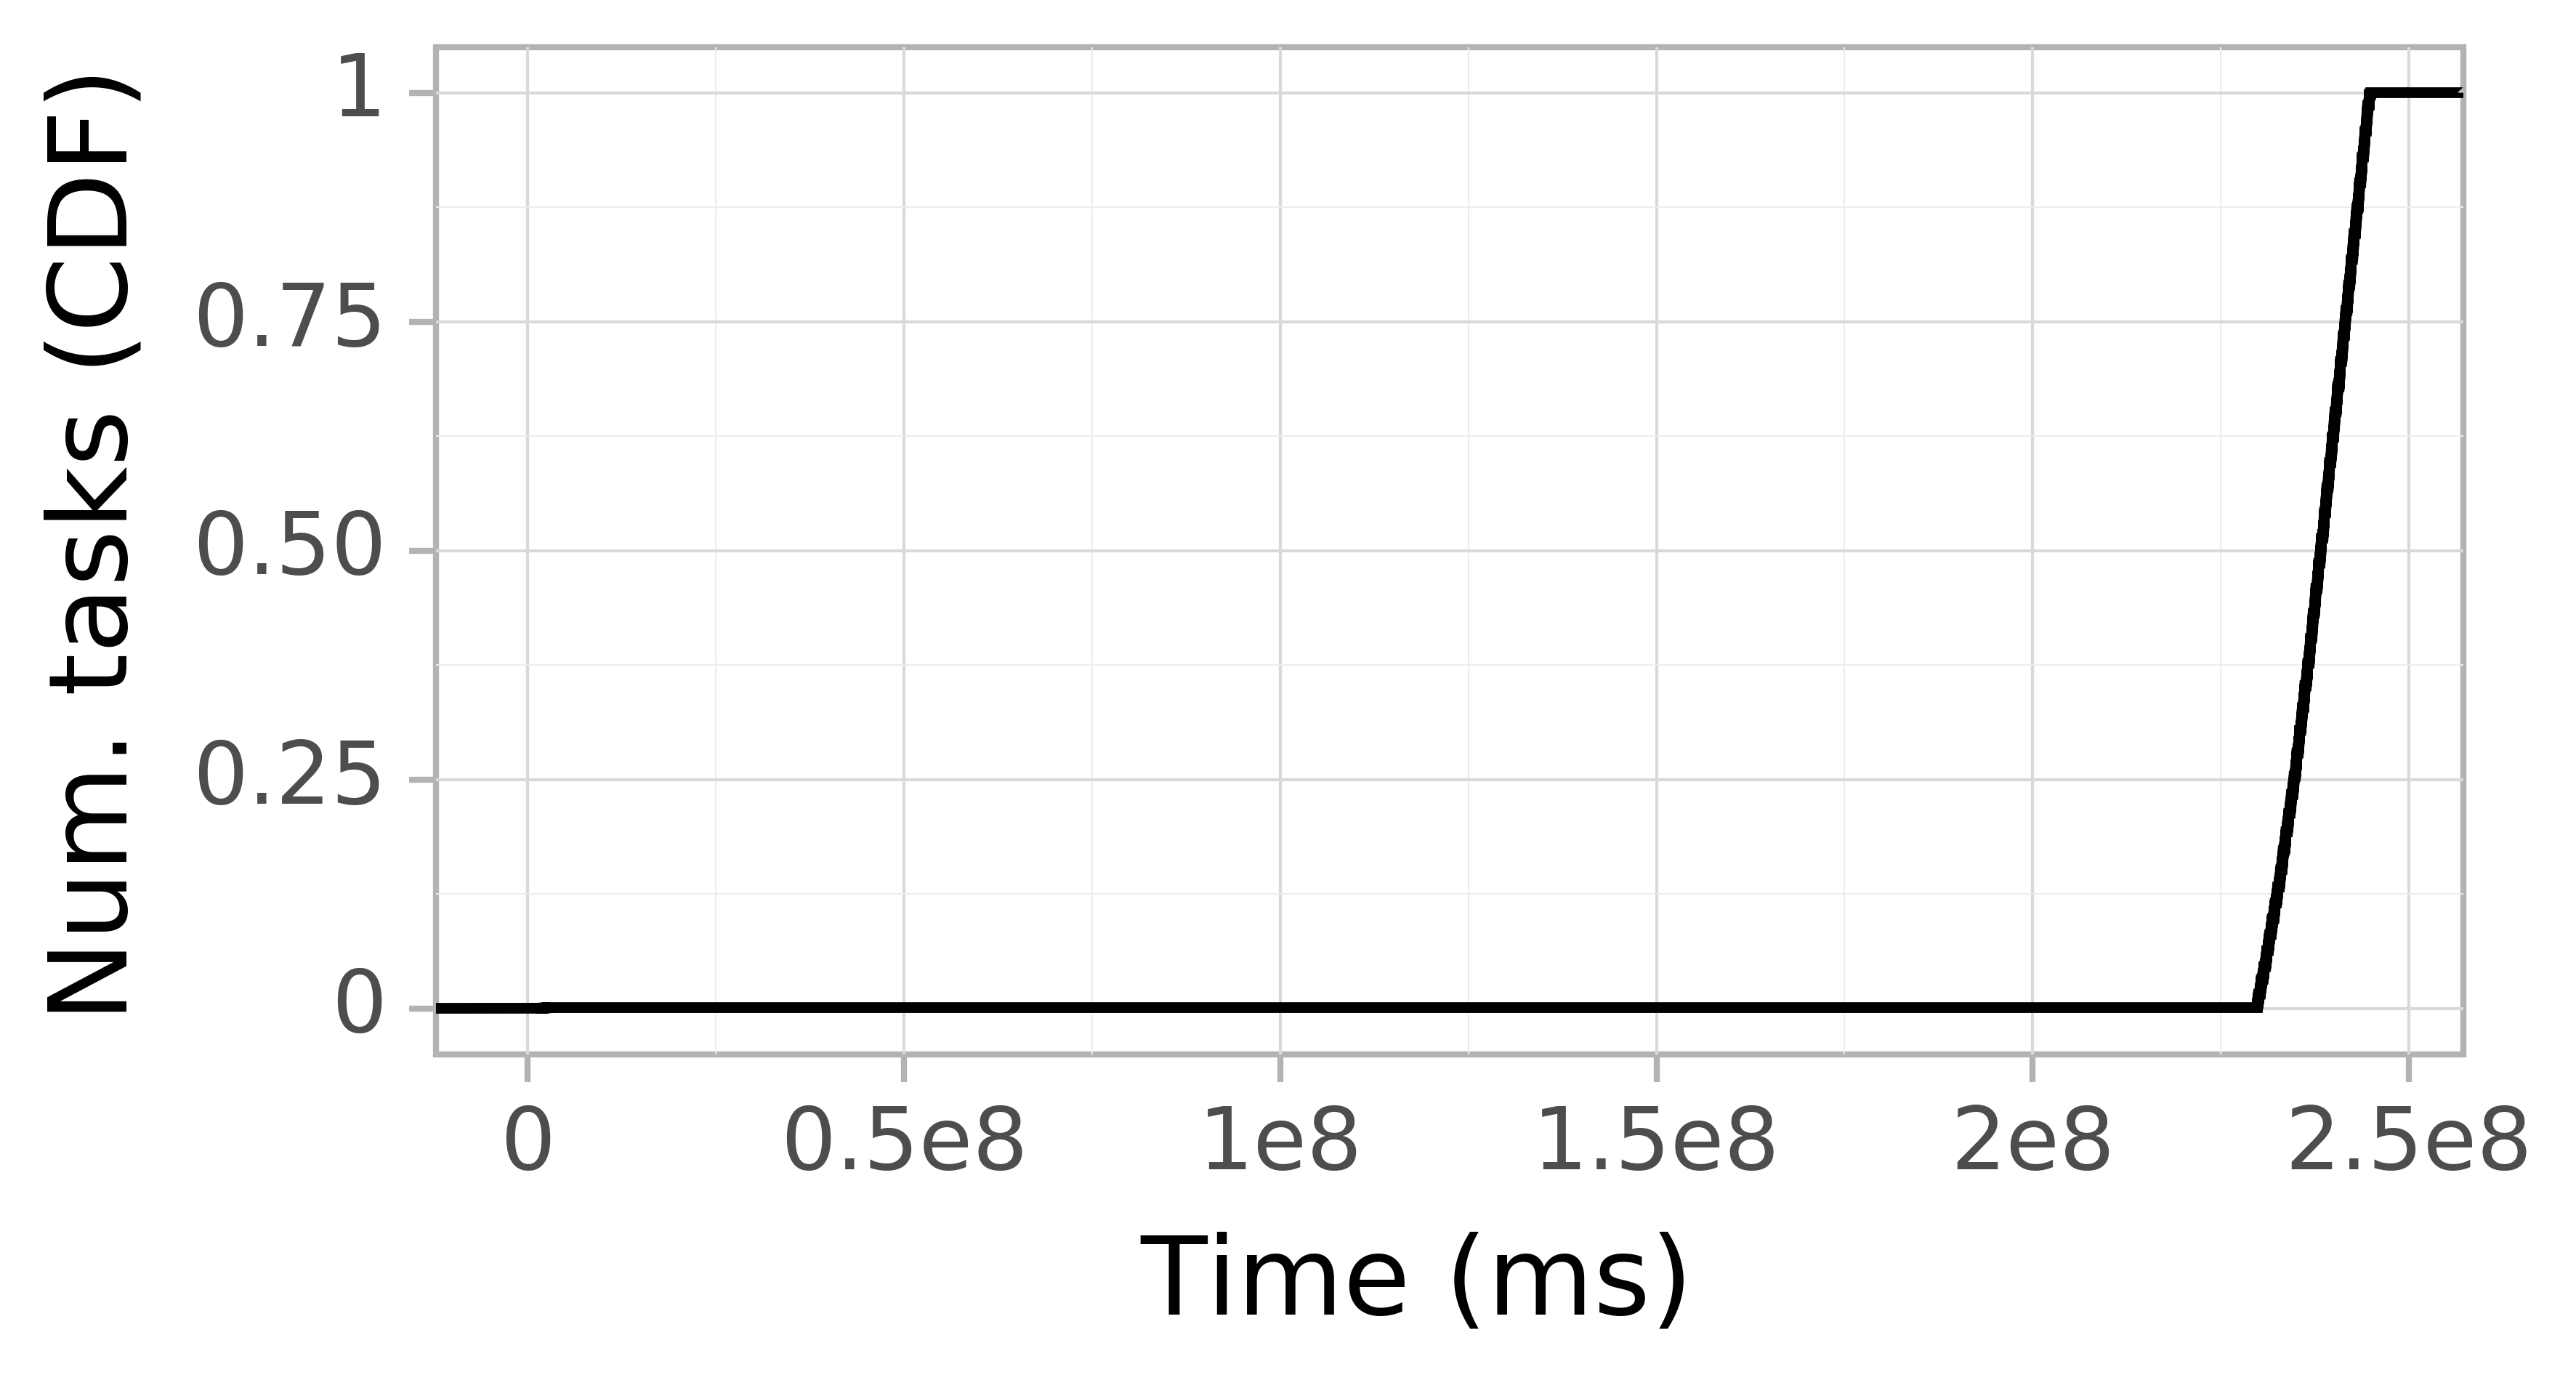 Task arrival CDF graph for the askalon-new_ee54 trace.